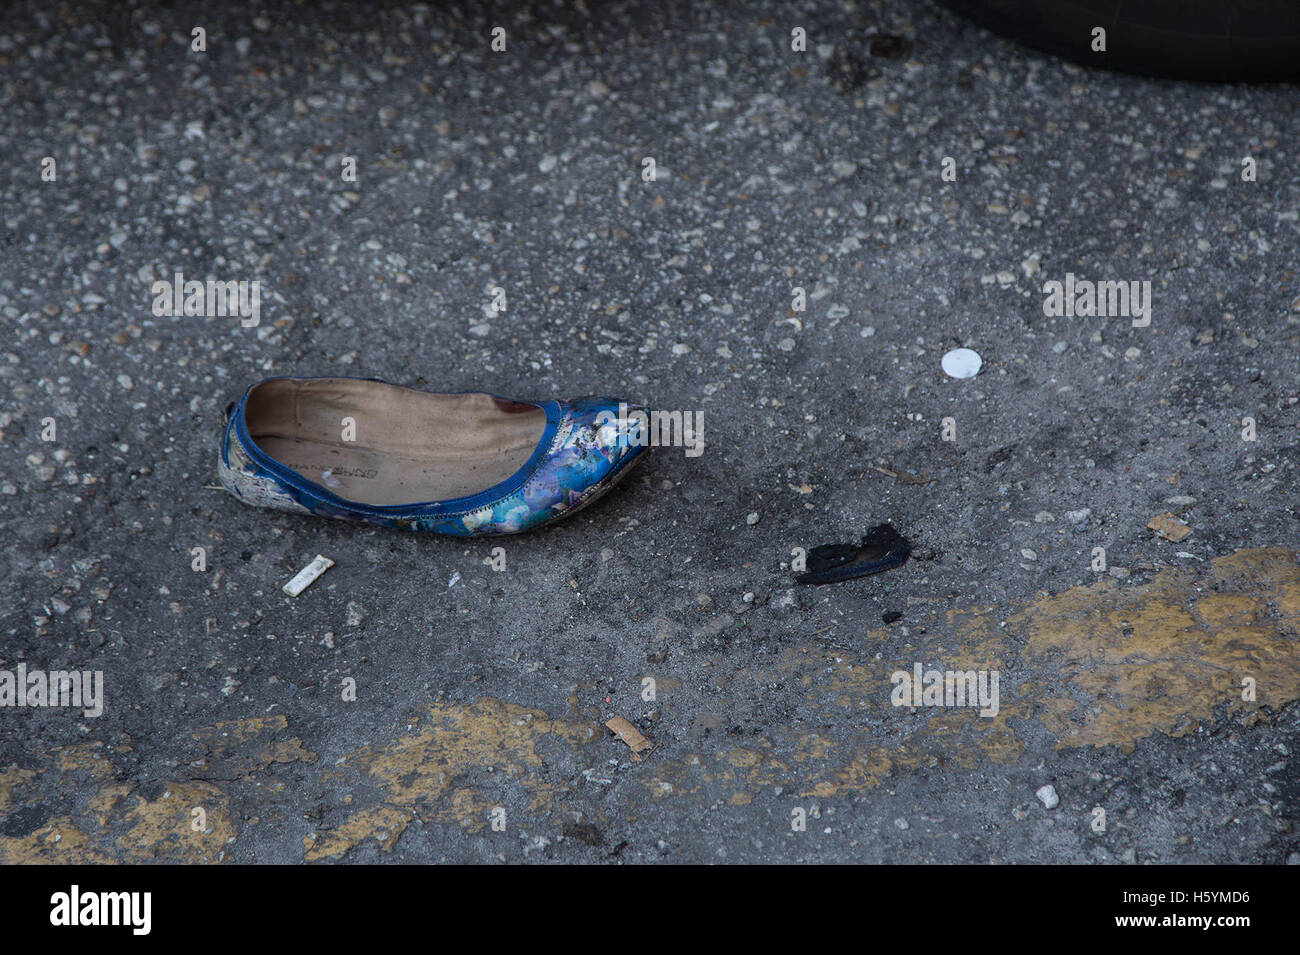 West Palm Beach, Florida, USA. 22nd Oct, 2016. A shoe belonging to a severely burned woman is left in the parking lot in front of St. Anne & Vierge Miracle Botanica at 932 Belvedere Road in West Palm Beach, Florida on October 22, 2016. One person died and another was severely burned Saturday afternoon after an explosion. © Allen Eyestone/The Palm Beach Post/ZUMA Wire/Alamy Live News Stock Photo